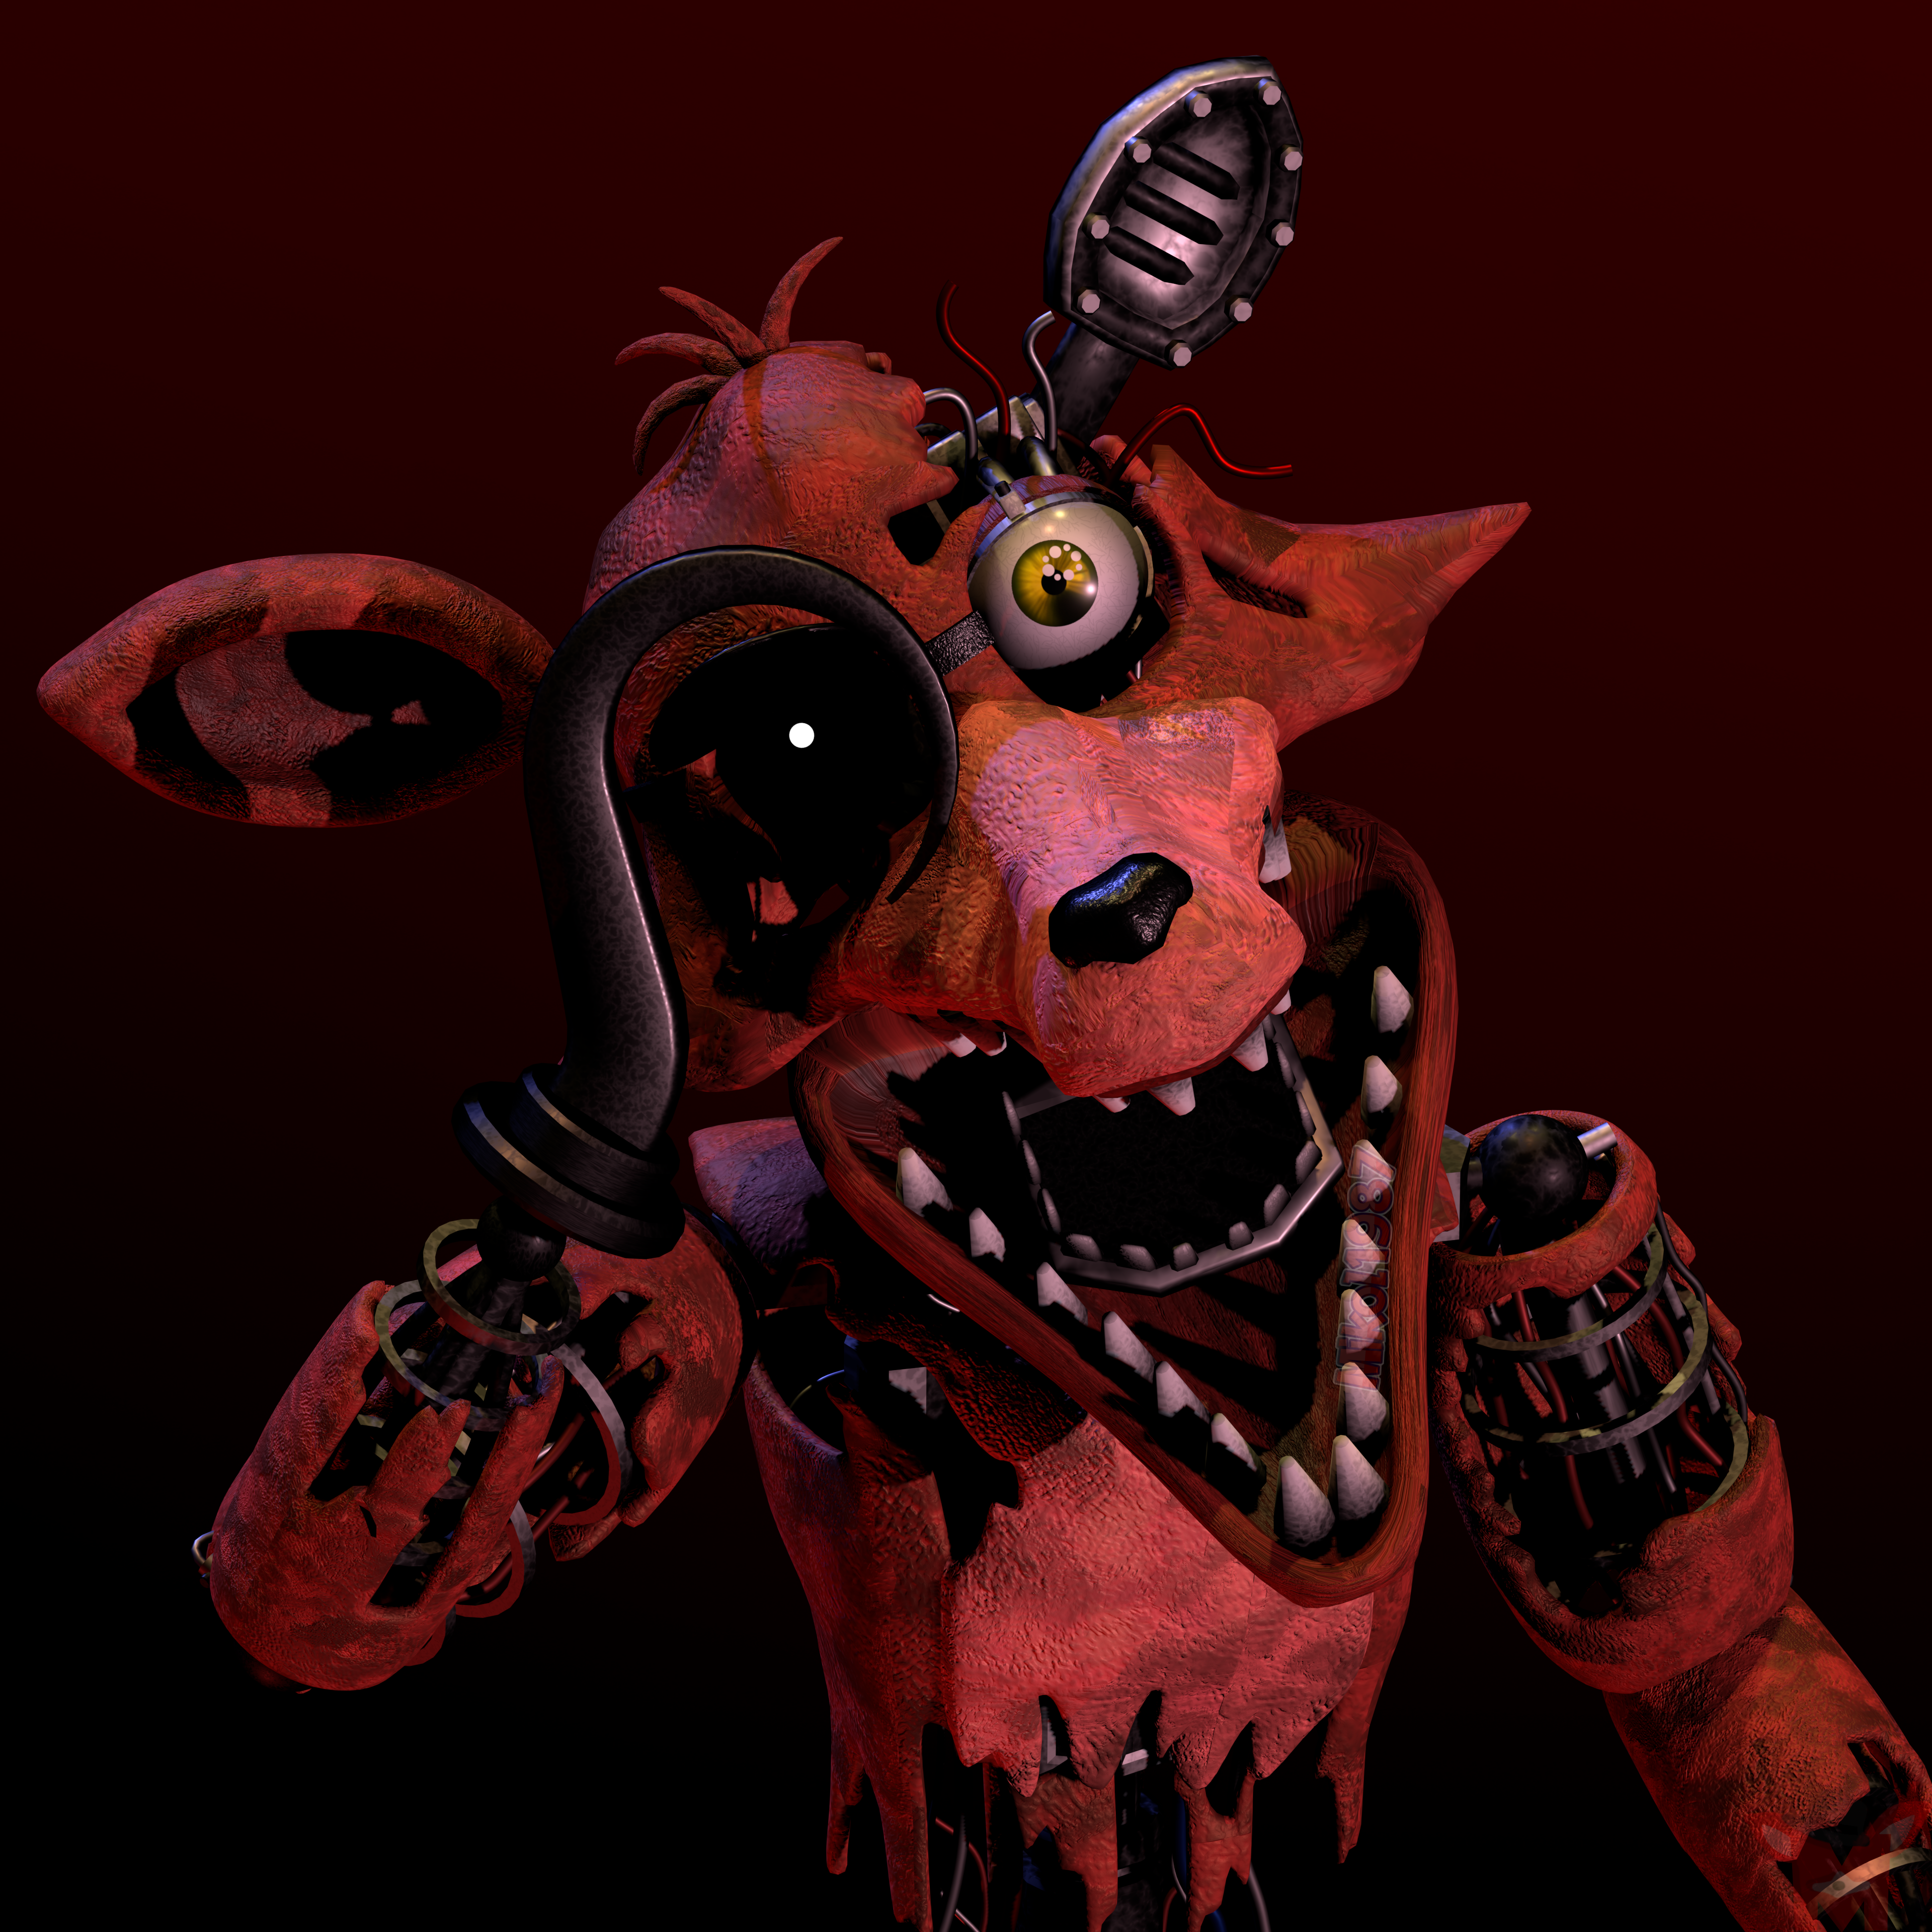 Withered Foxy by Dany Fox 3D model rigged